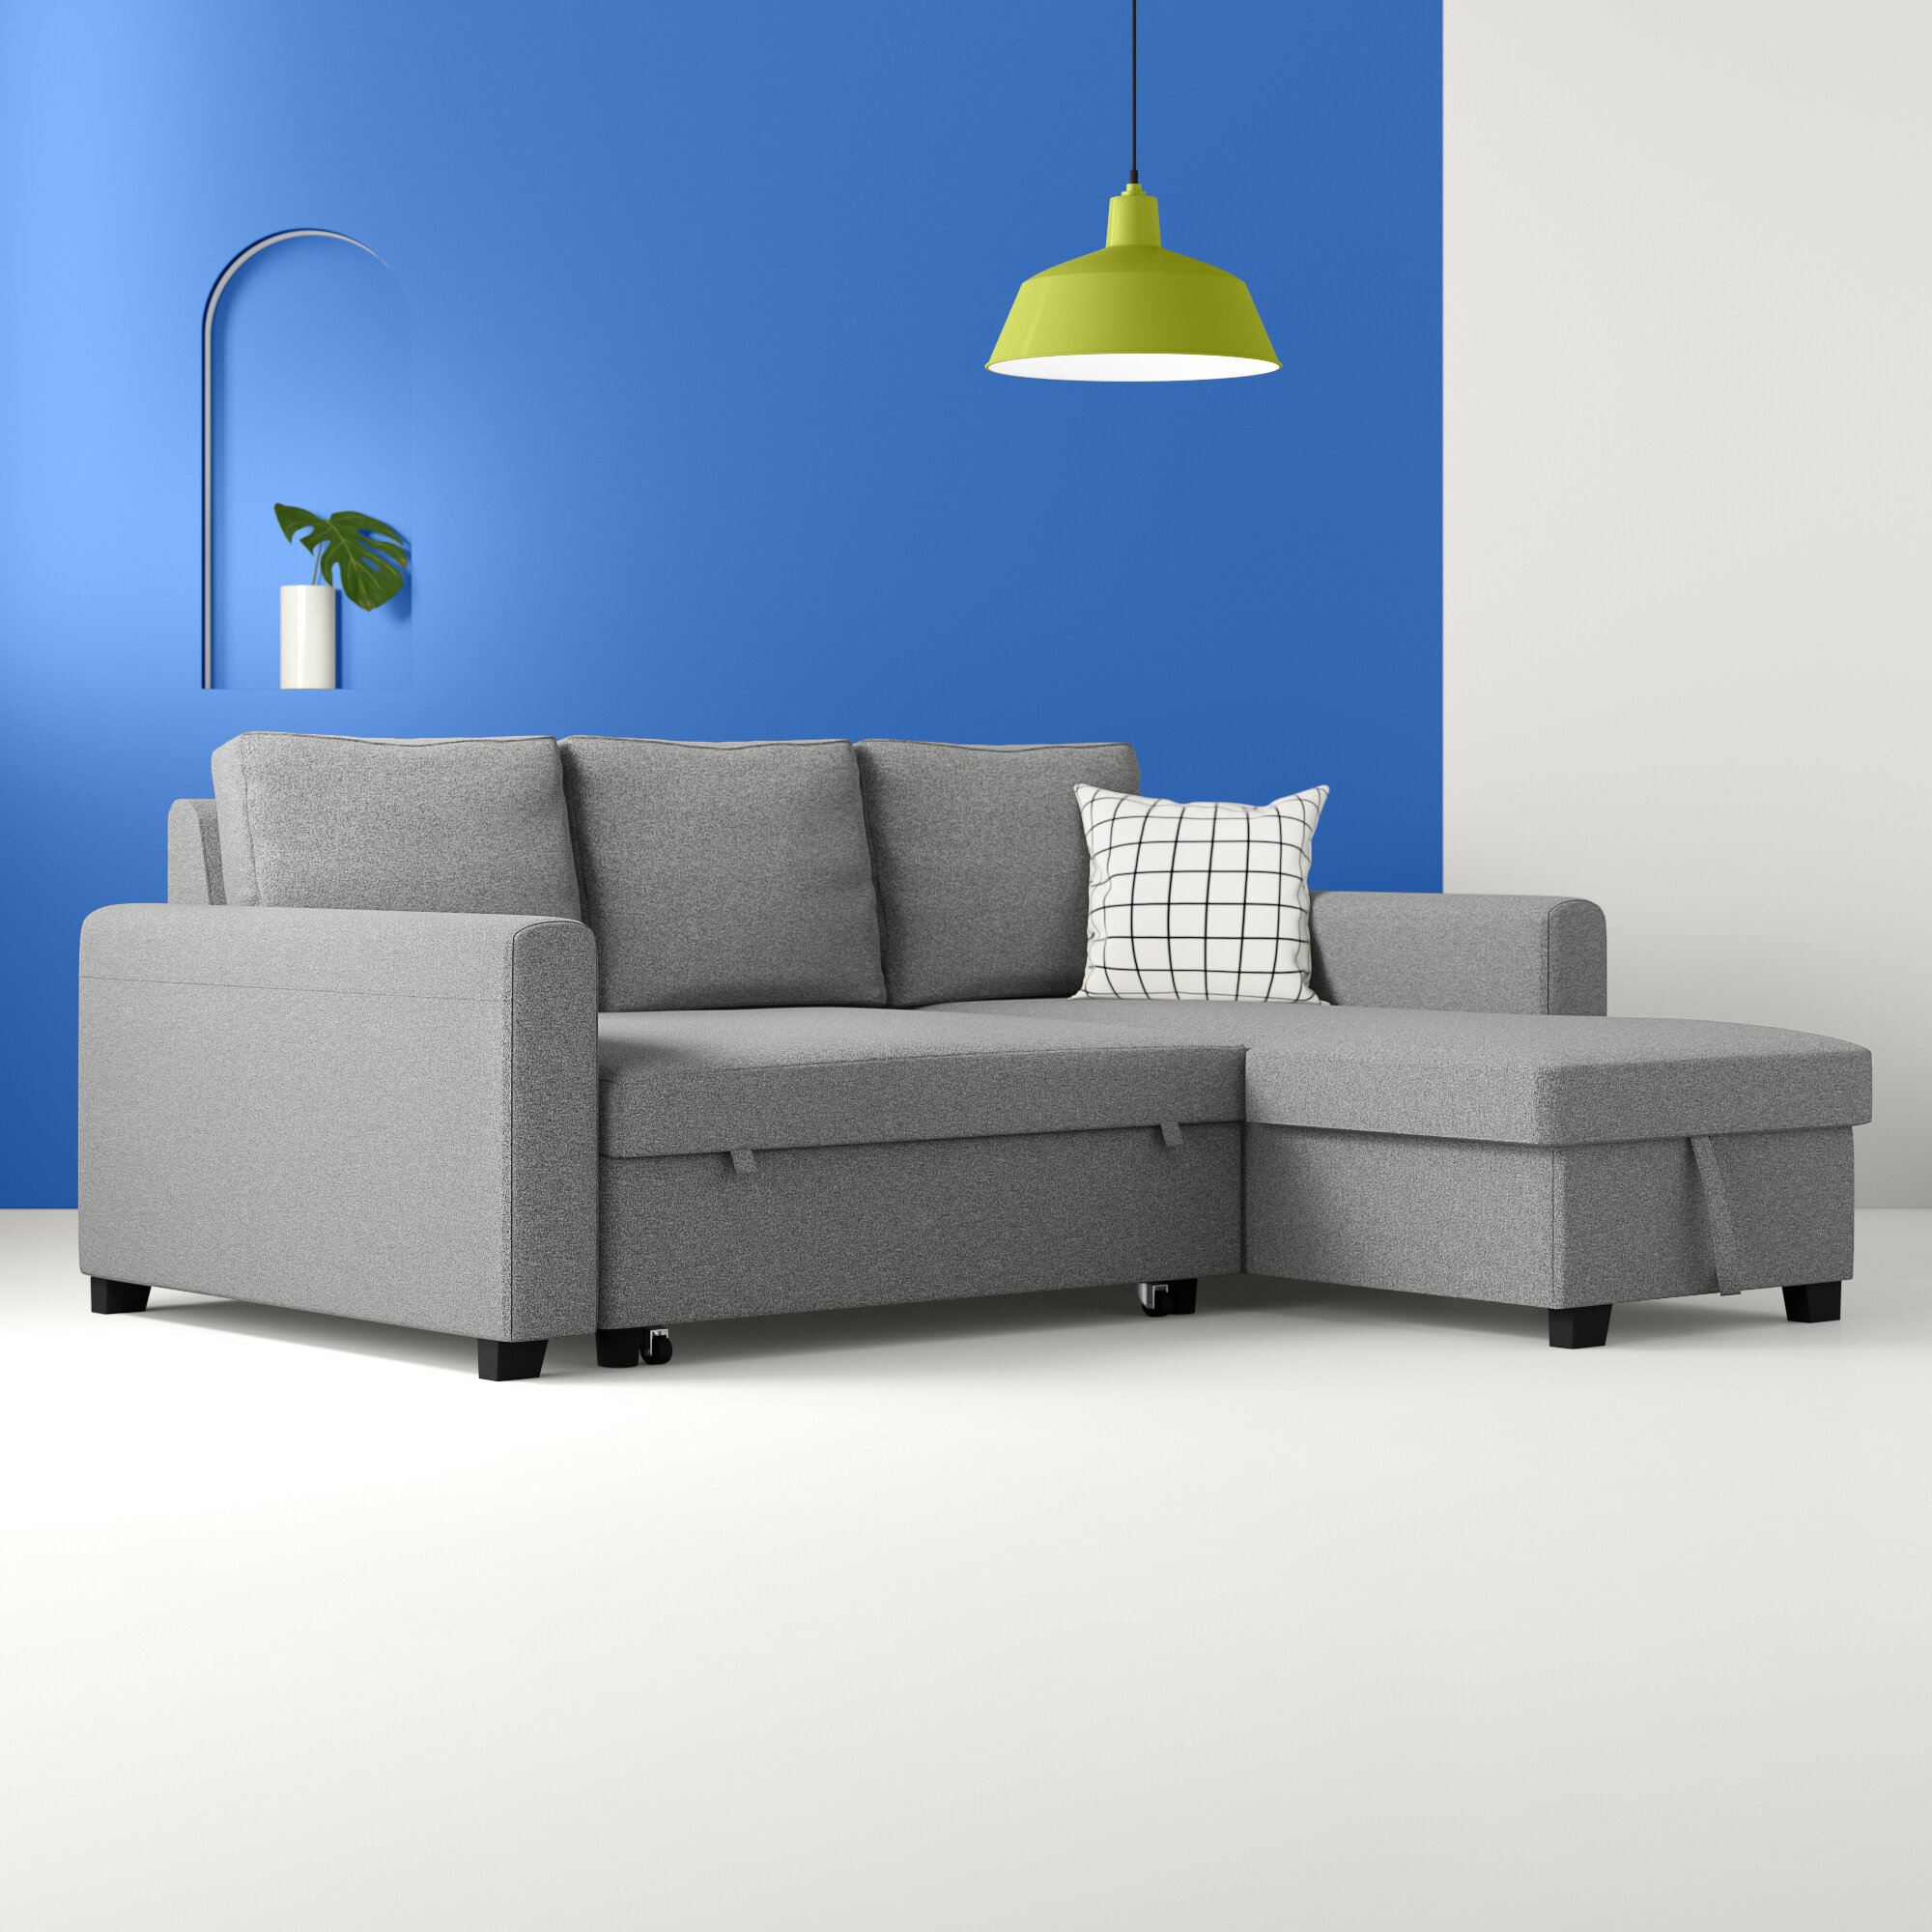 Featured image of post Grey Couch Pull Out / 4.0 из 5 звездоч., исходя из 2 оценки(ок) товара(2).